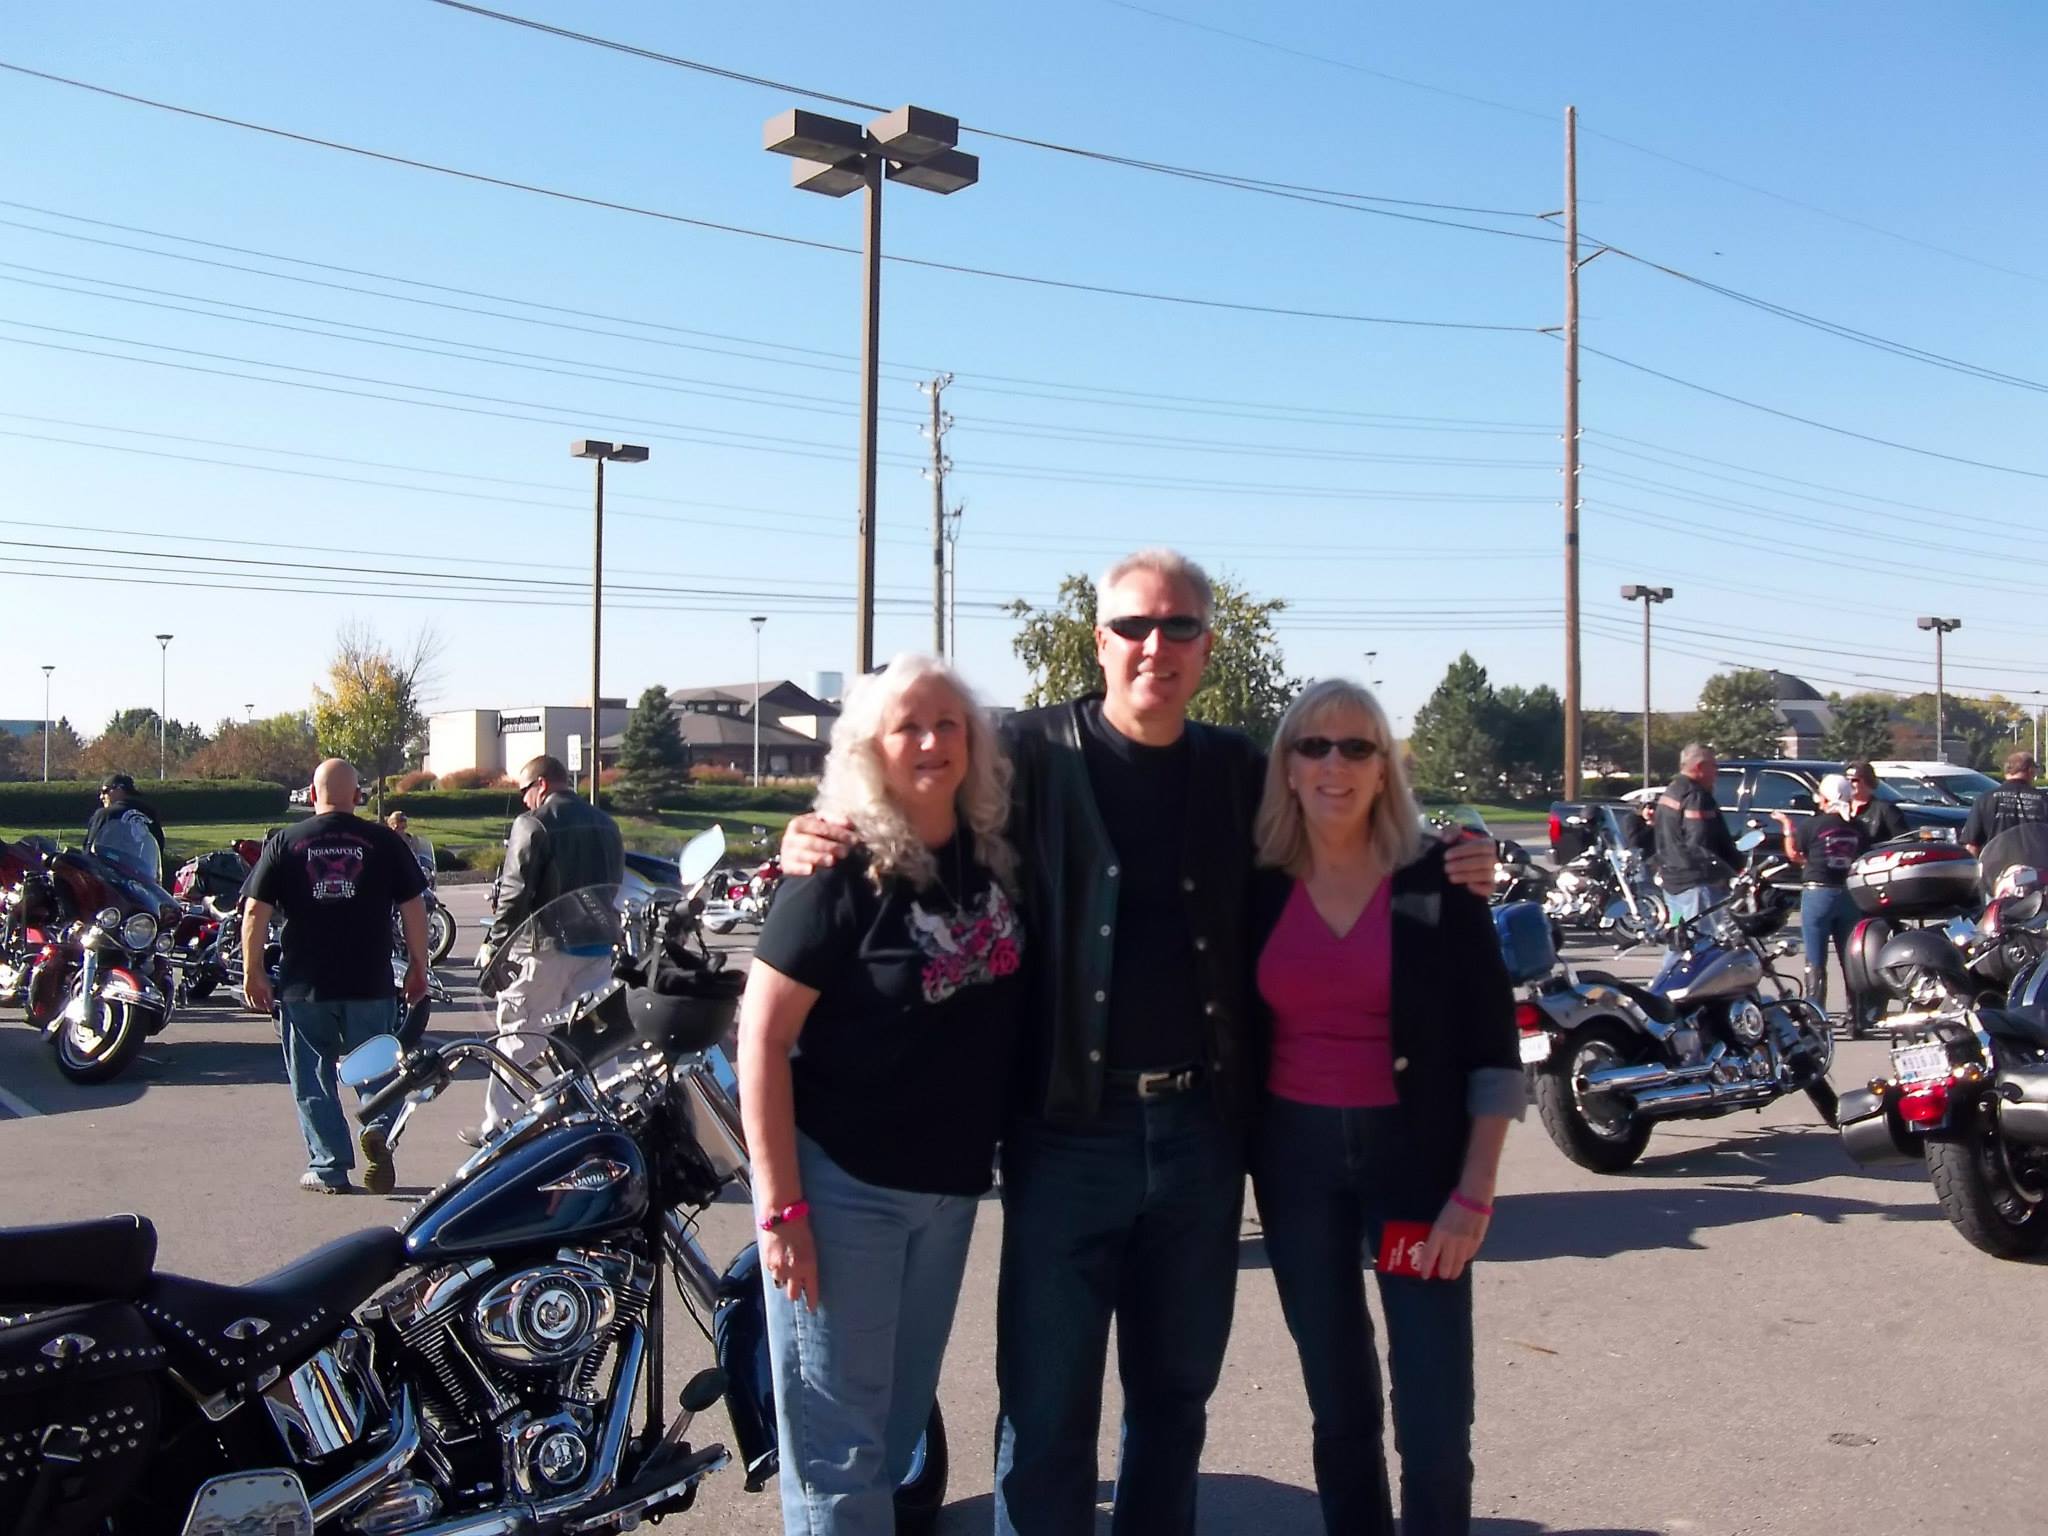 Paula of Rock for the Cure, Mark Ladendorf, and Julie Weiler at the "Rock for the Cure" ride to benefit breast cancer at Harley Davidson North in Indy